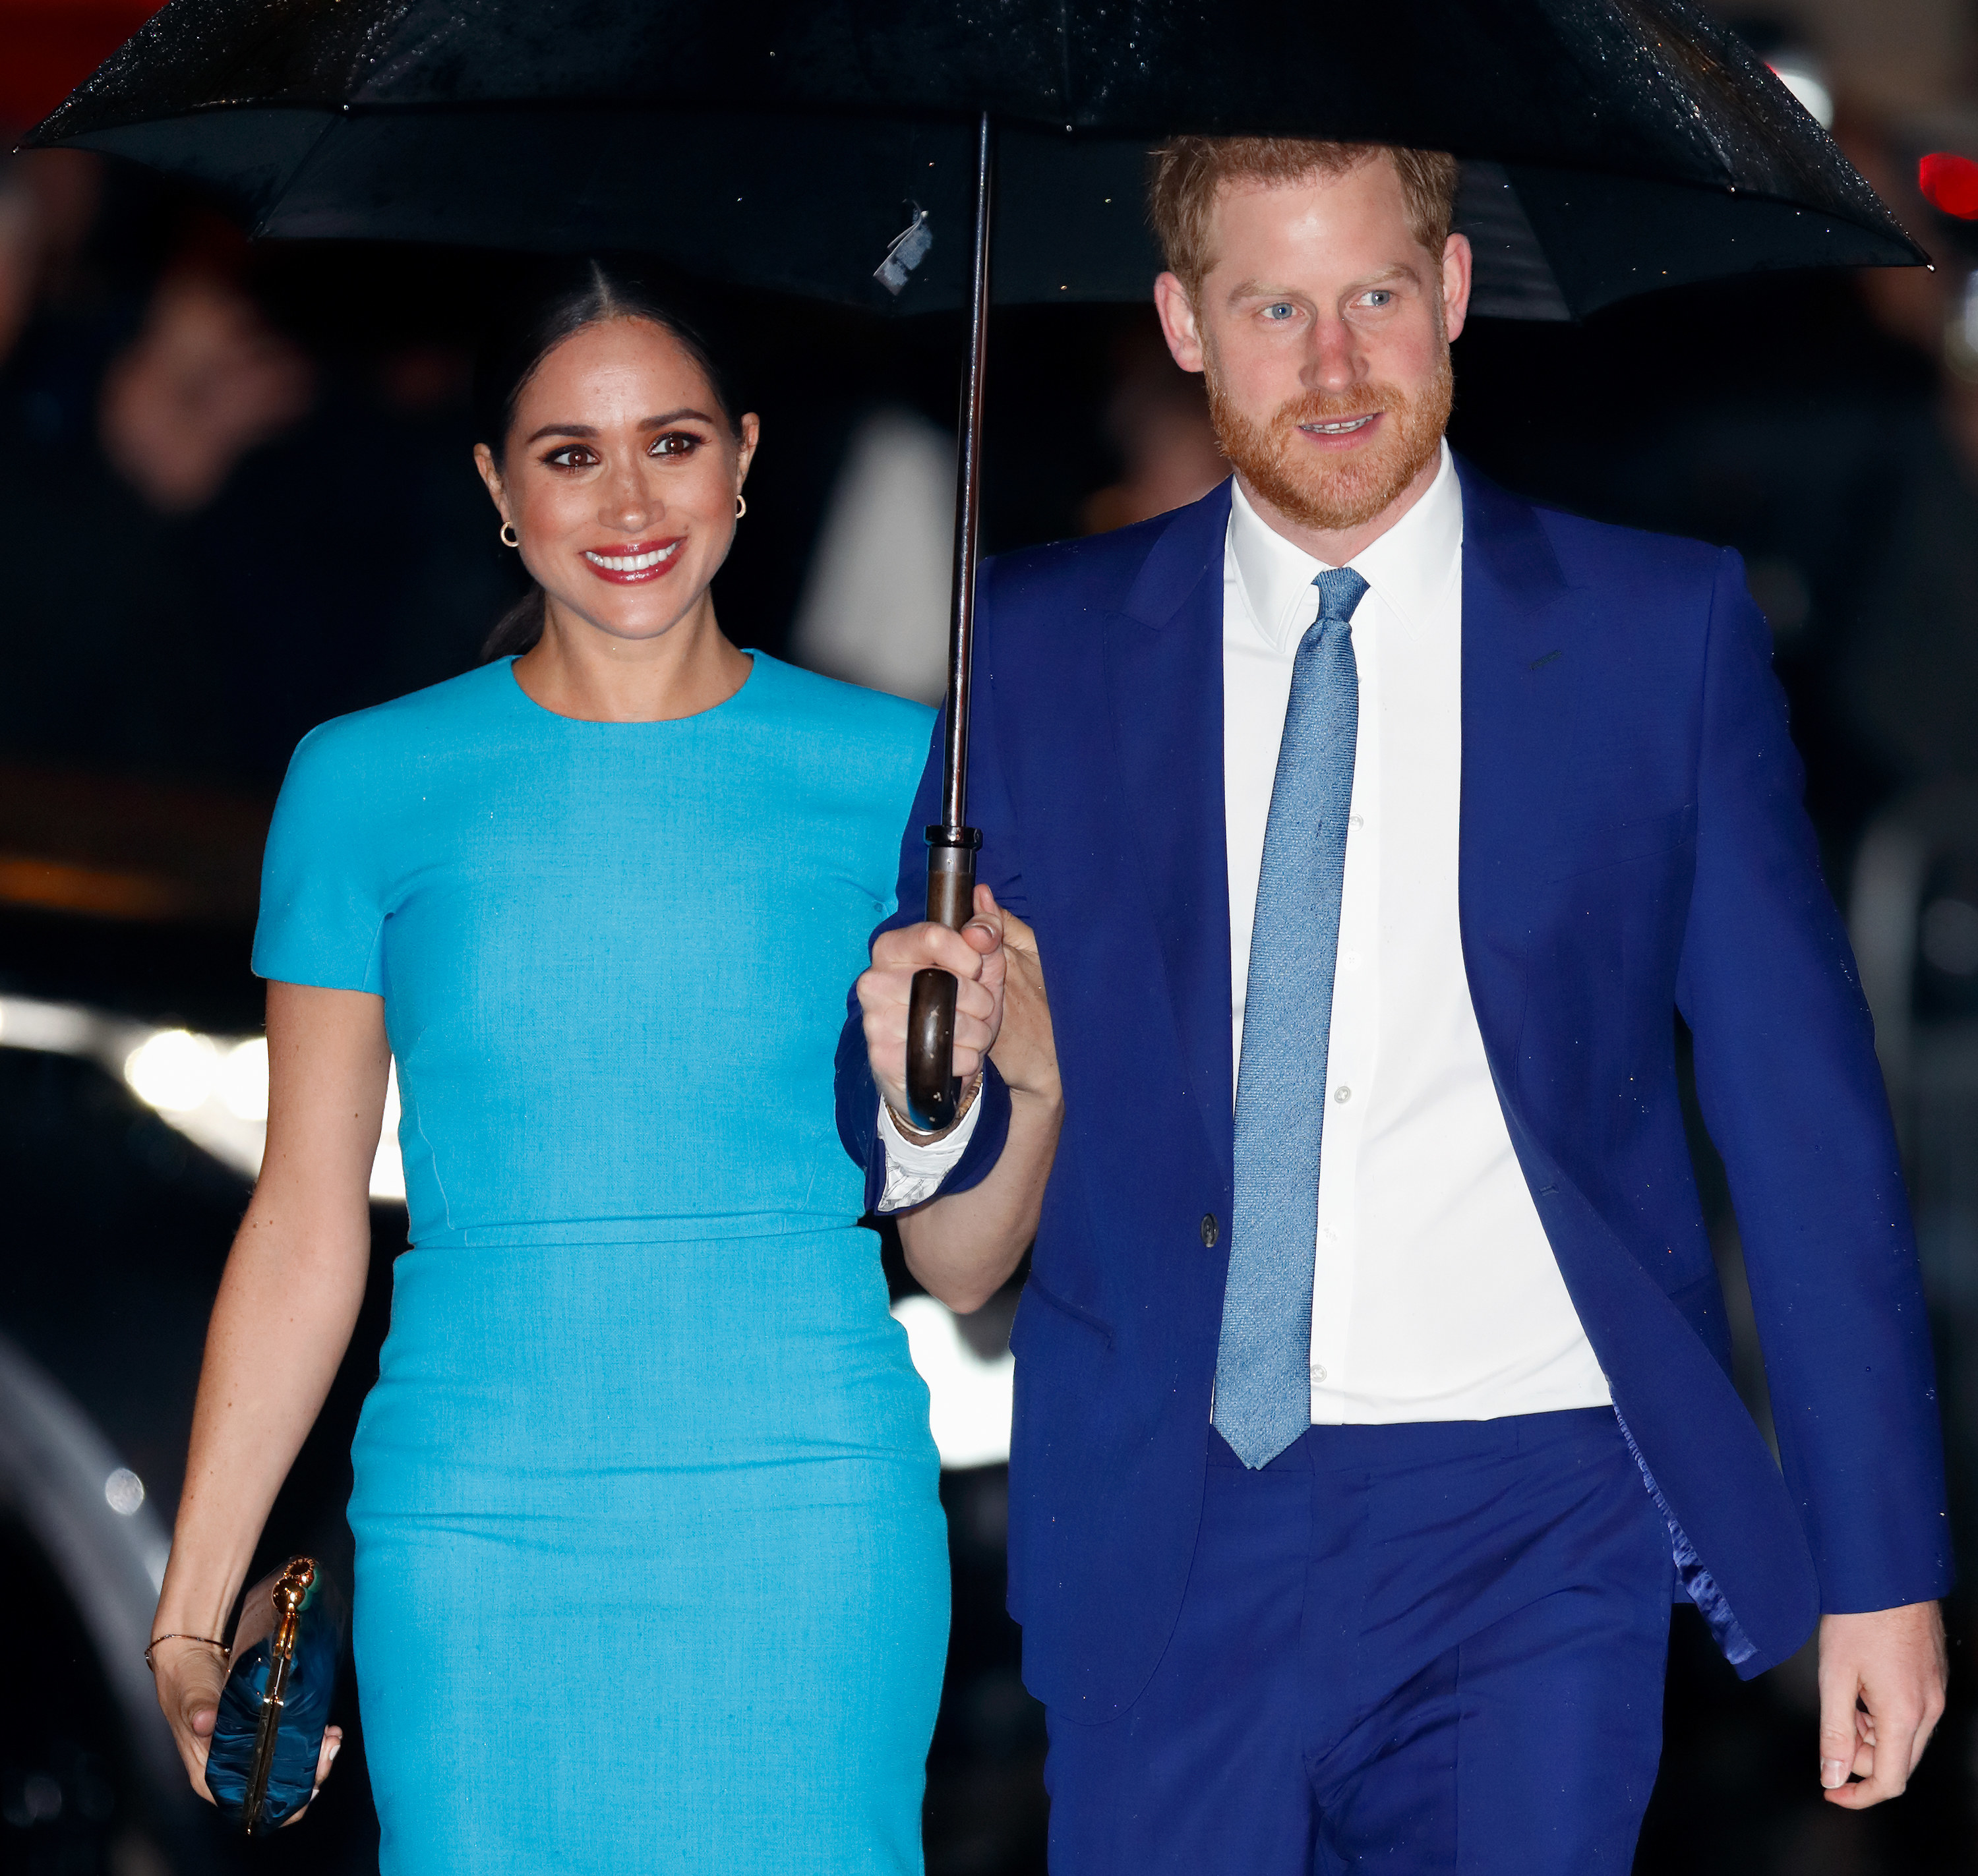 Harry and Meghan walking to an event while holding an umbrella